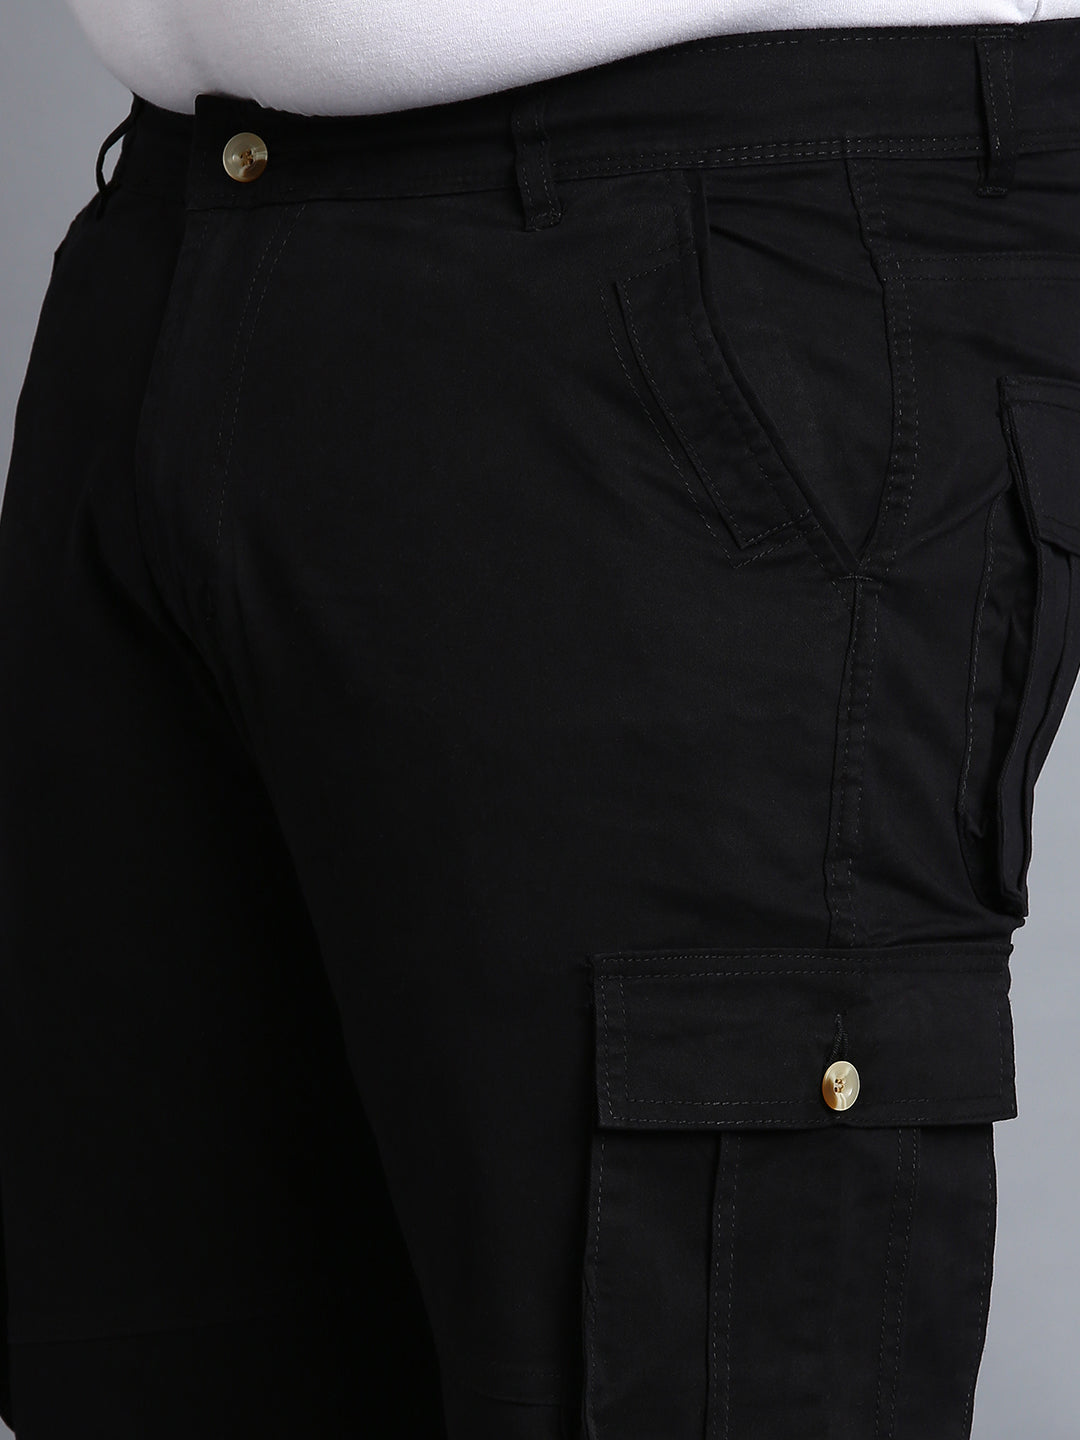 Plus Men's Black Regular Fit Solid Cargo Chino Pant with 6 Pockets